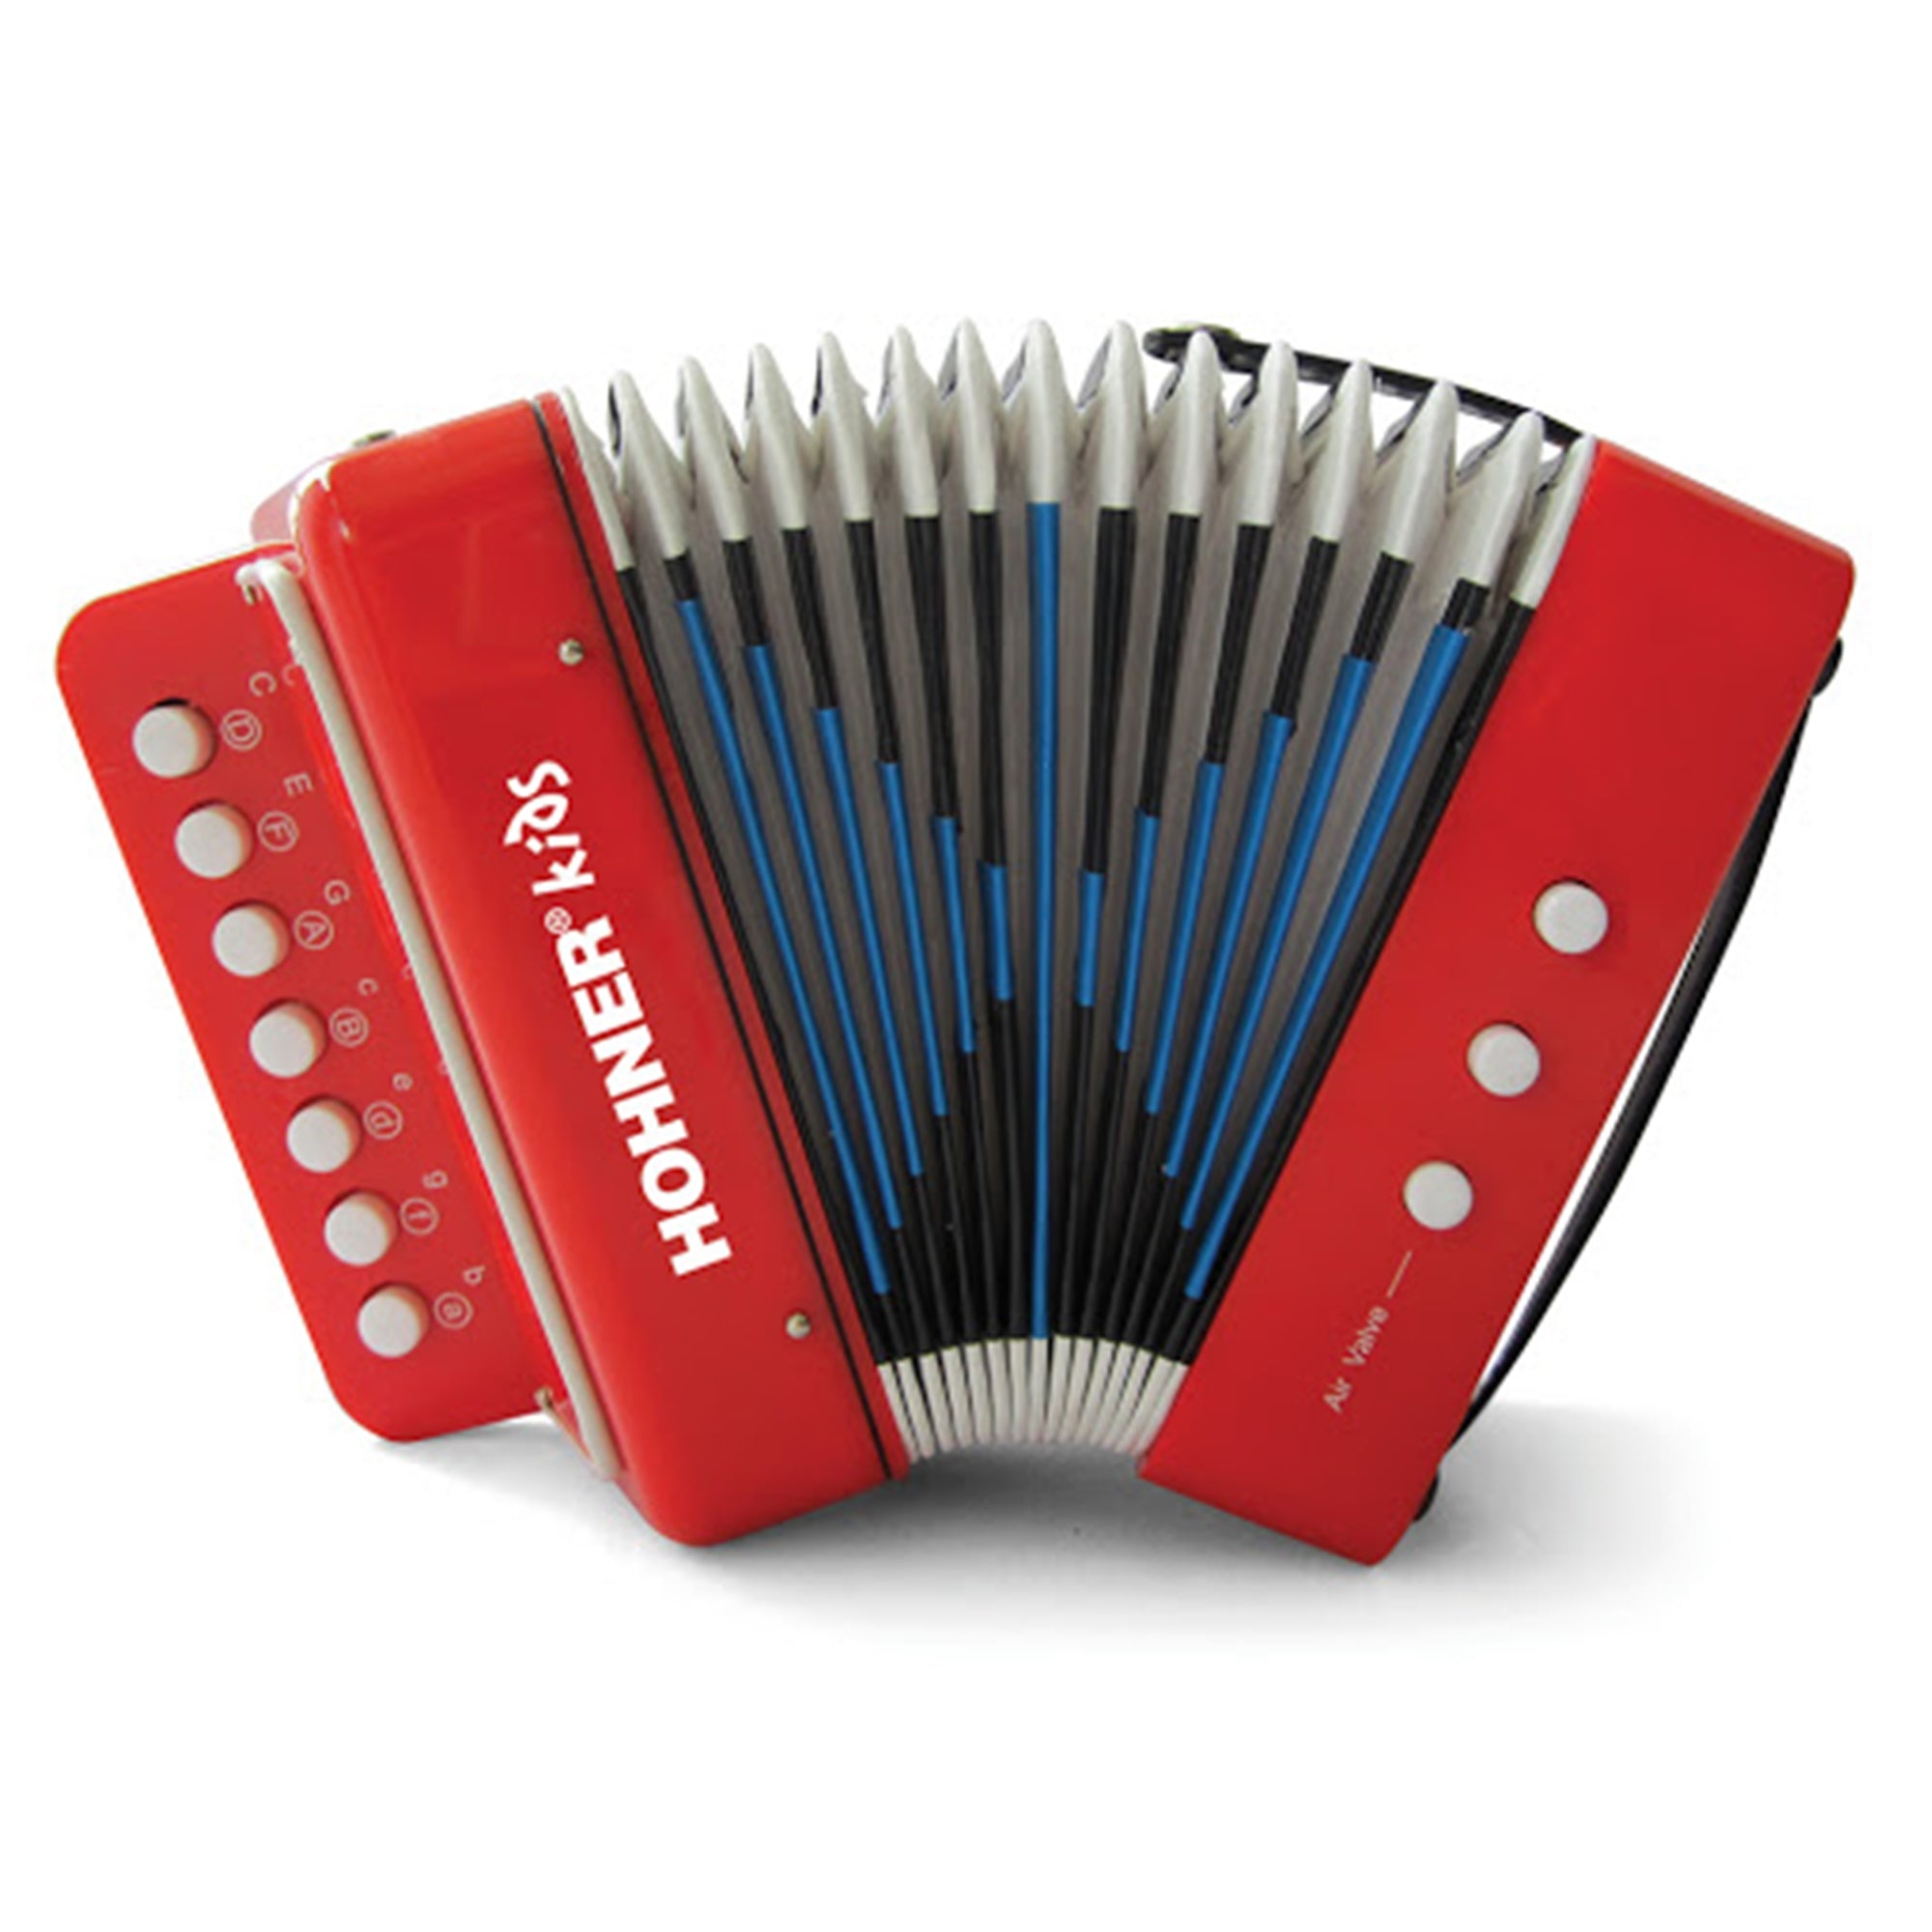 HOHNER KIDS UC102B Toy Accordion, Transparent Blue (w/ Songbook & Playing Instructions